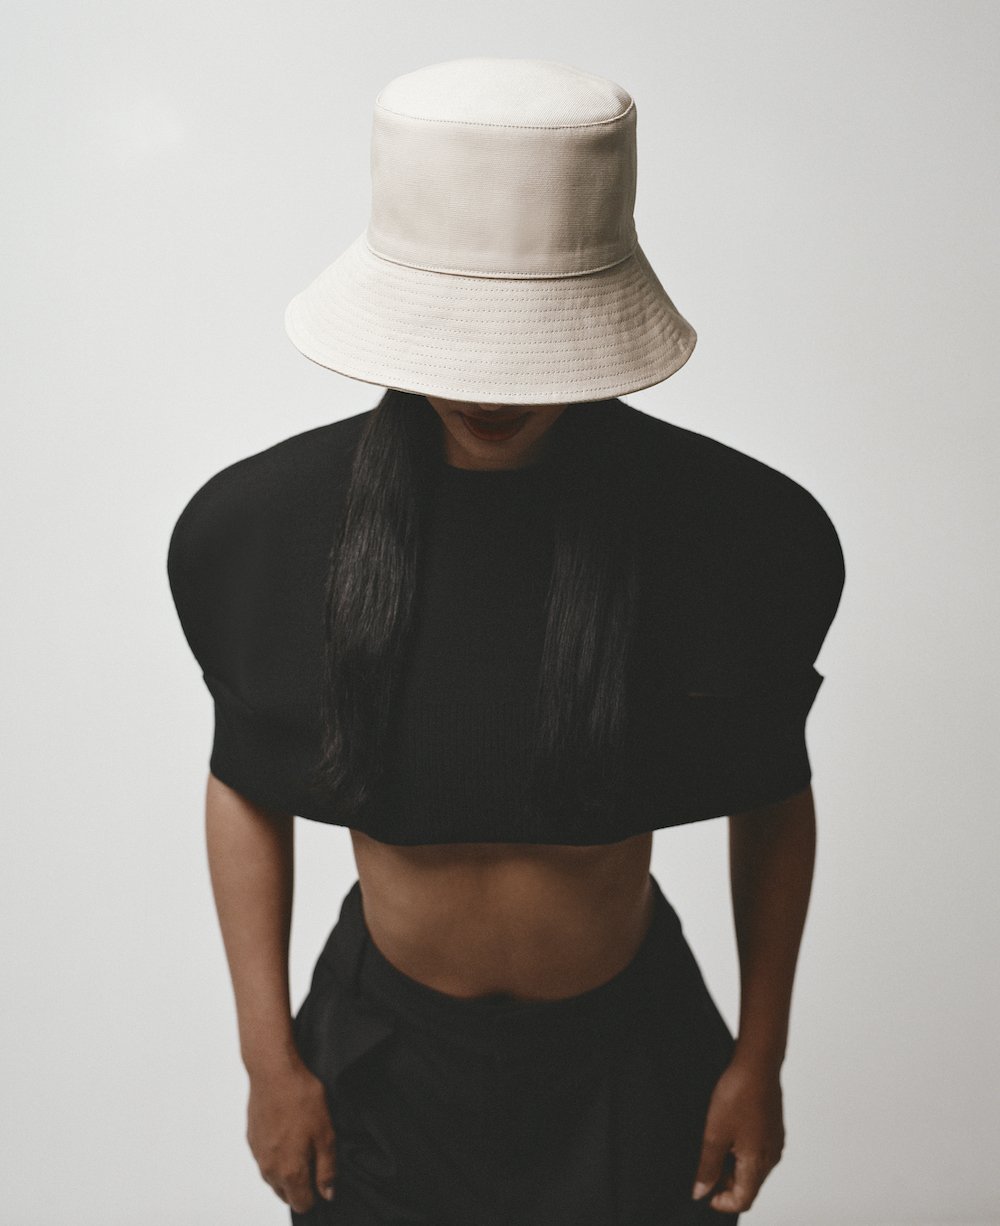 Rebe | Bucket Hat - Taupe